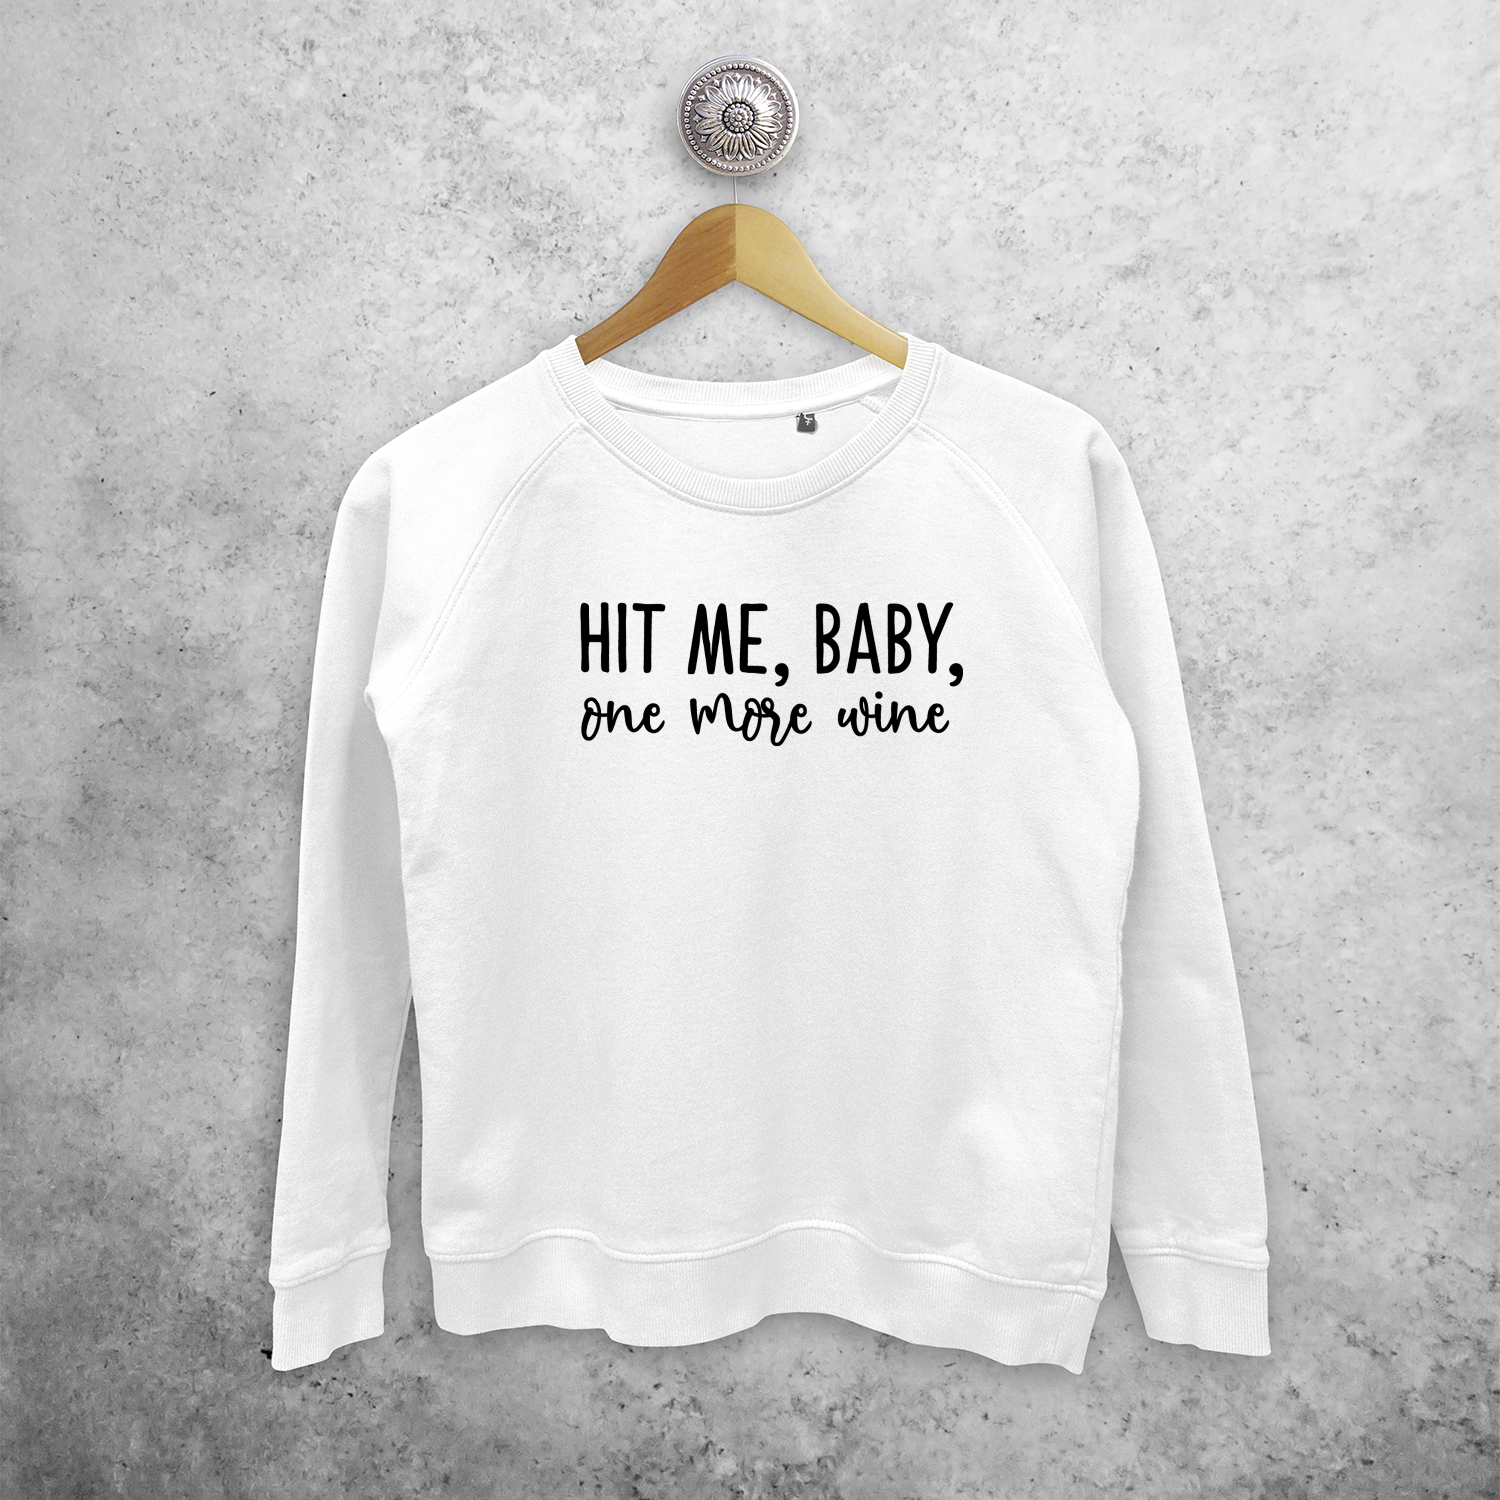 'Hit me, baby, one more wine' sweater